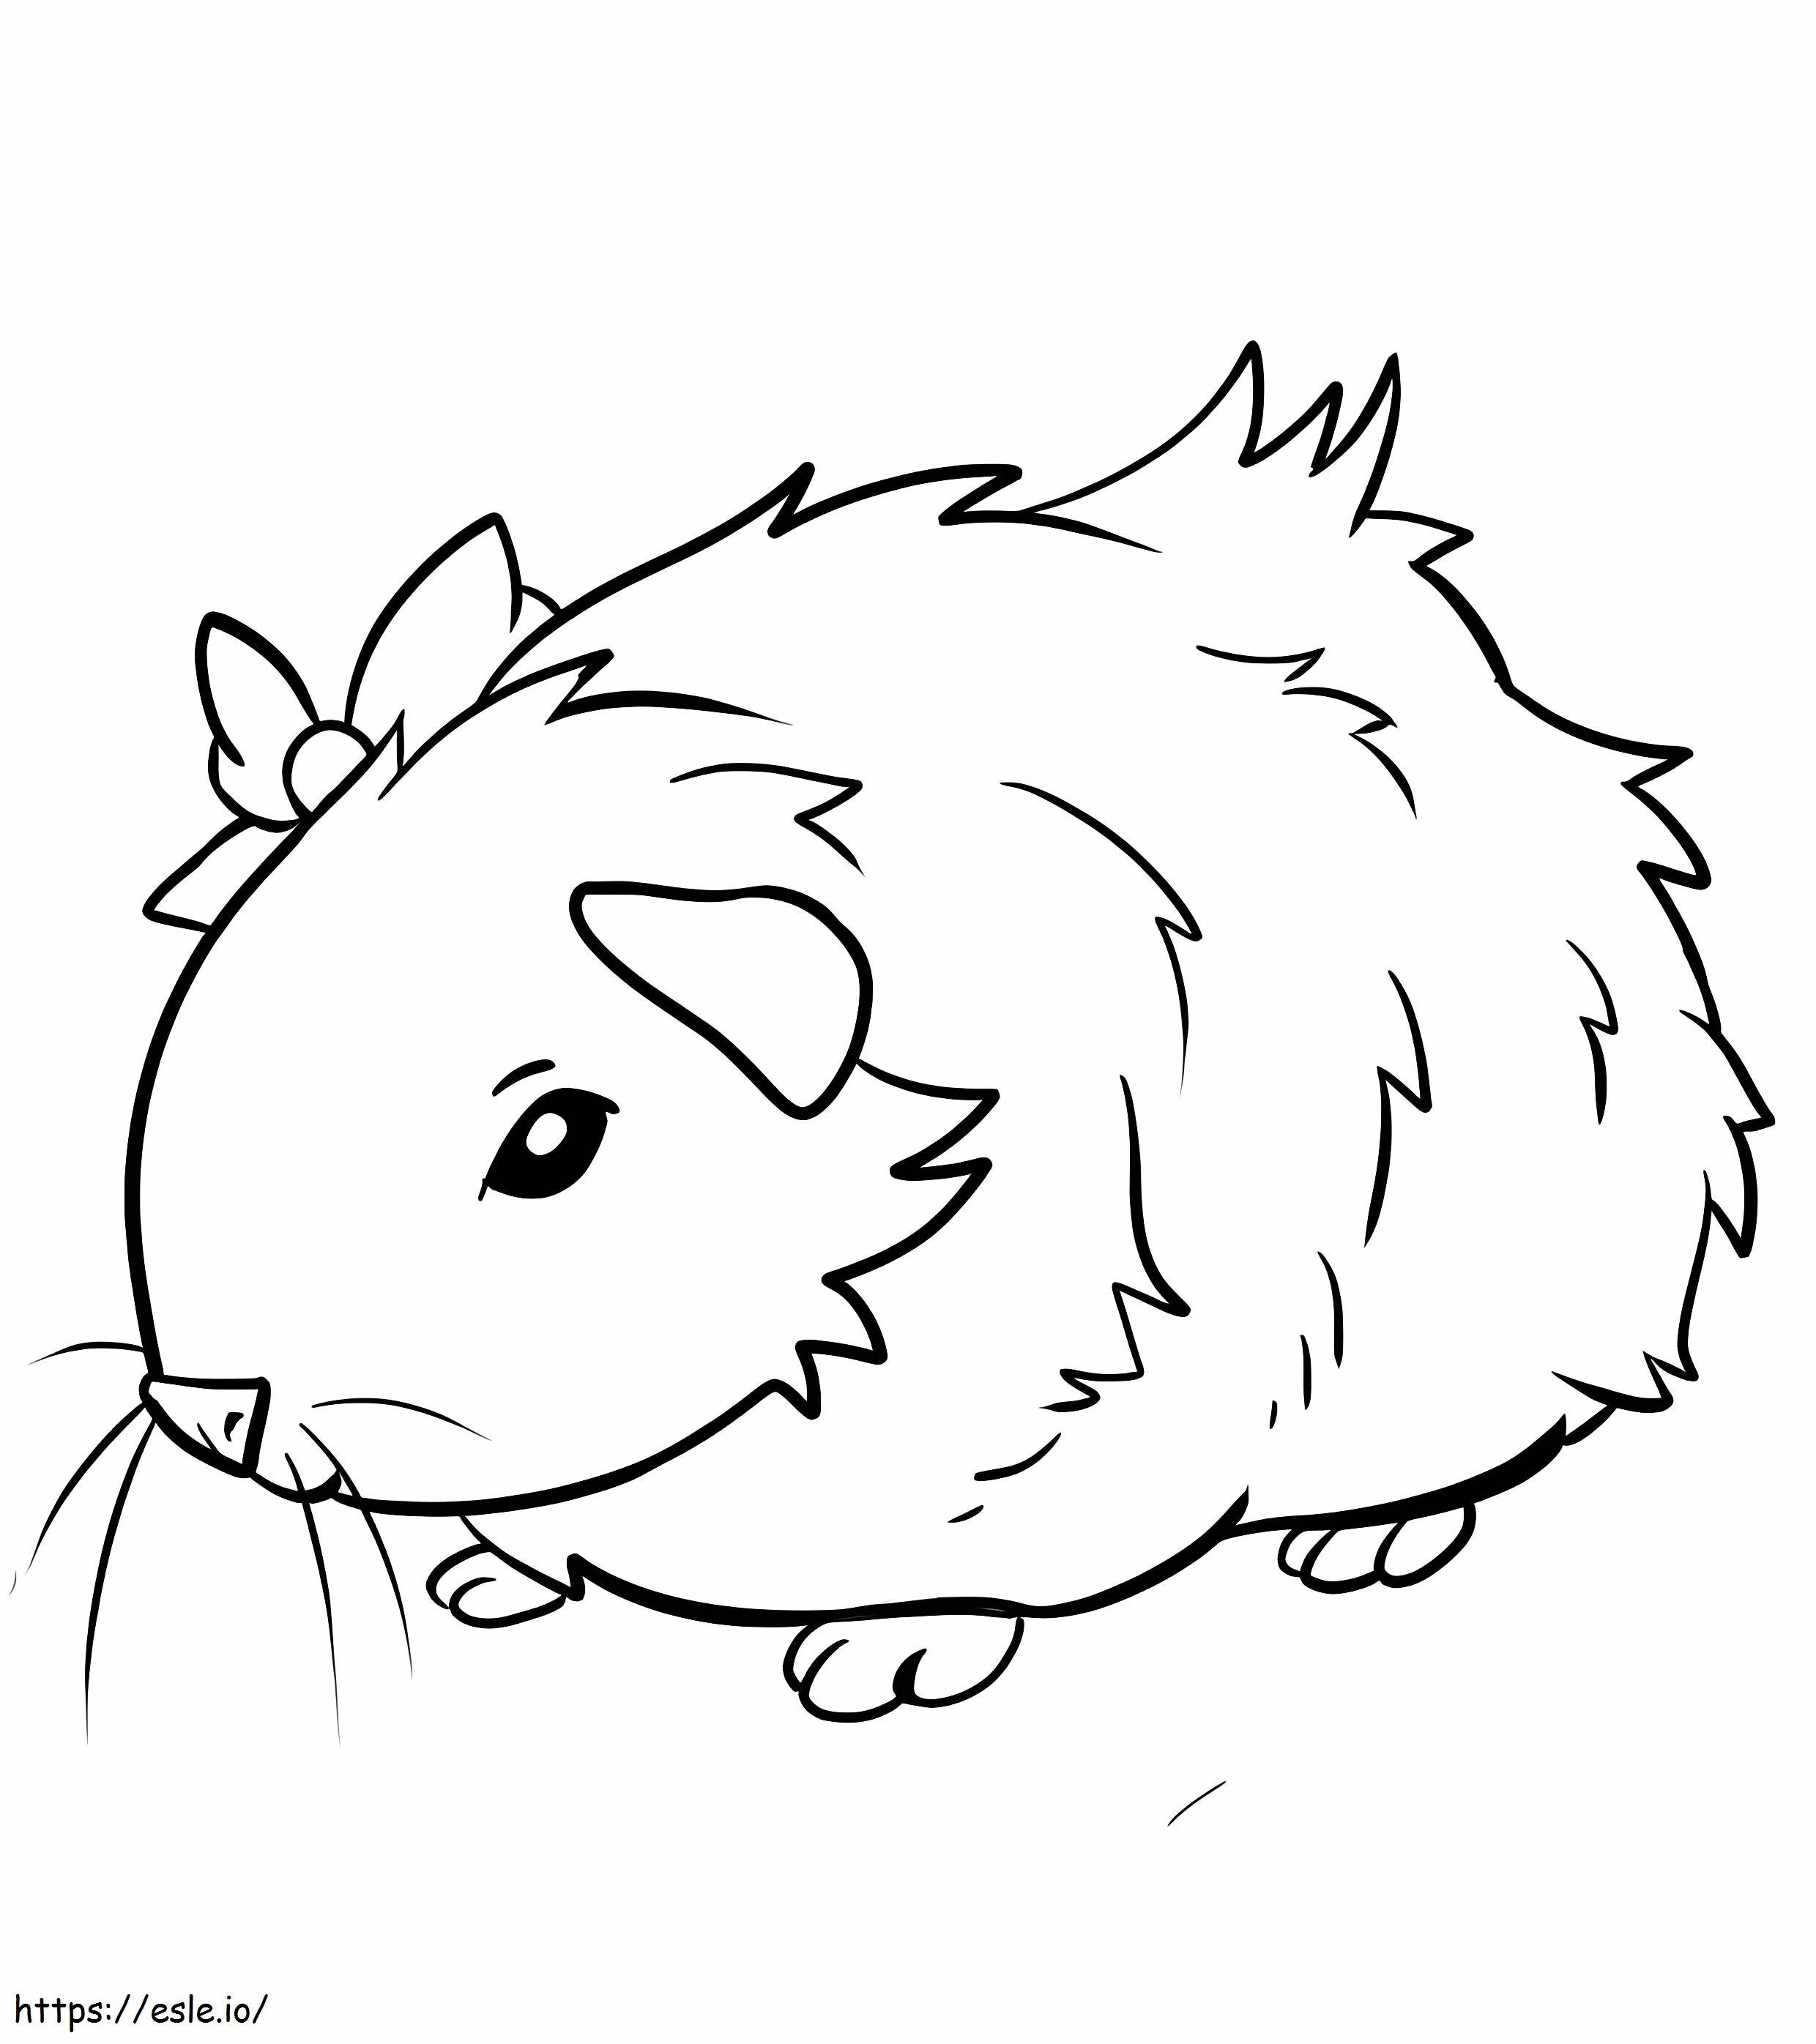 Loveable Guinea Pig coloring page